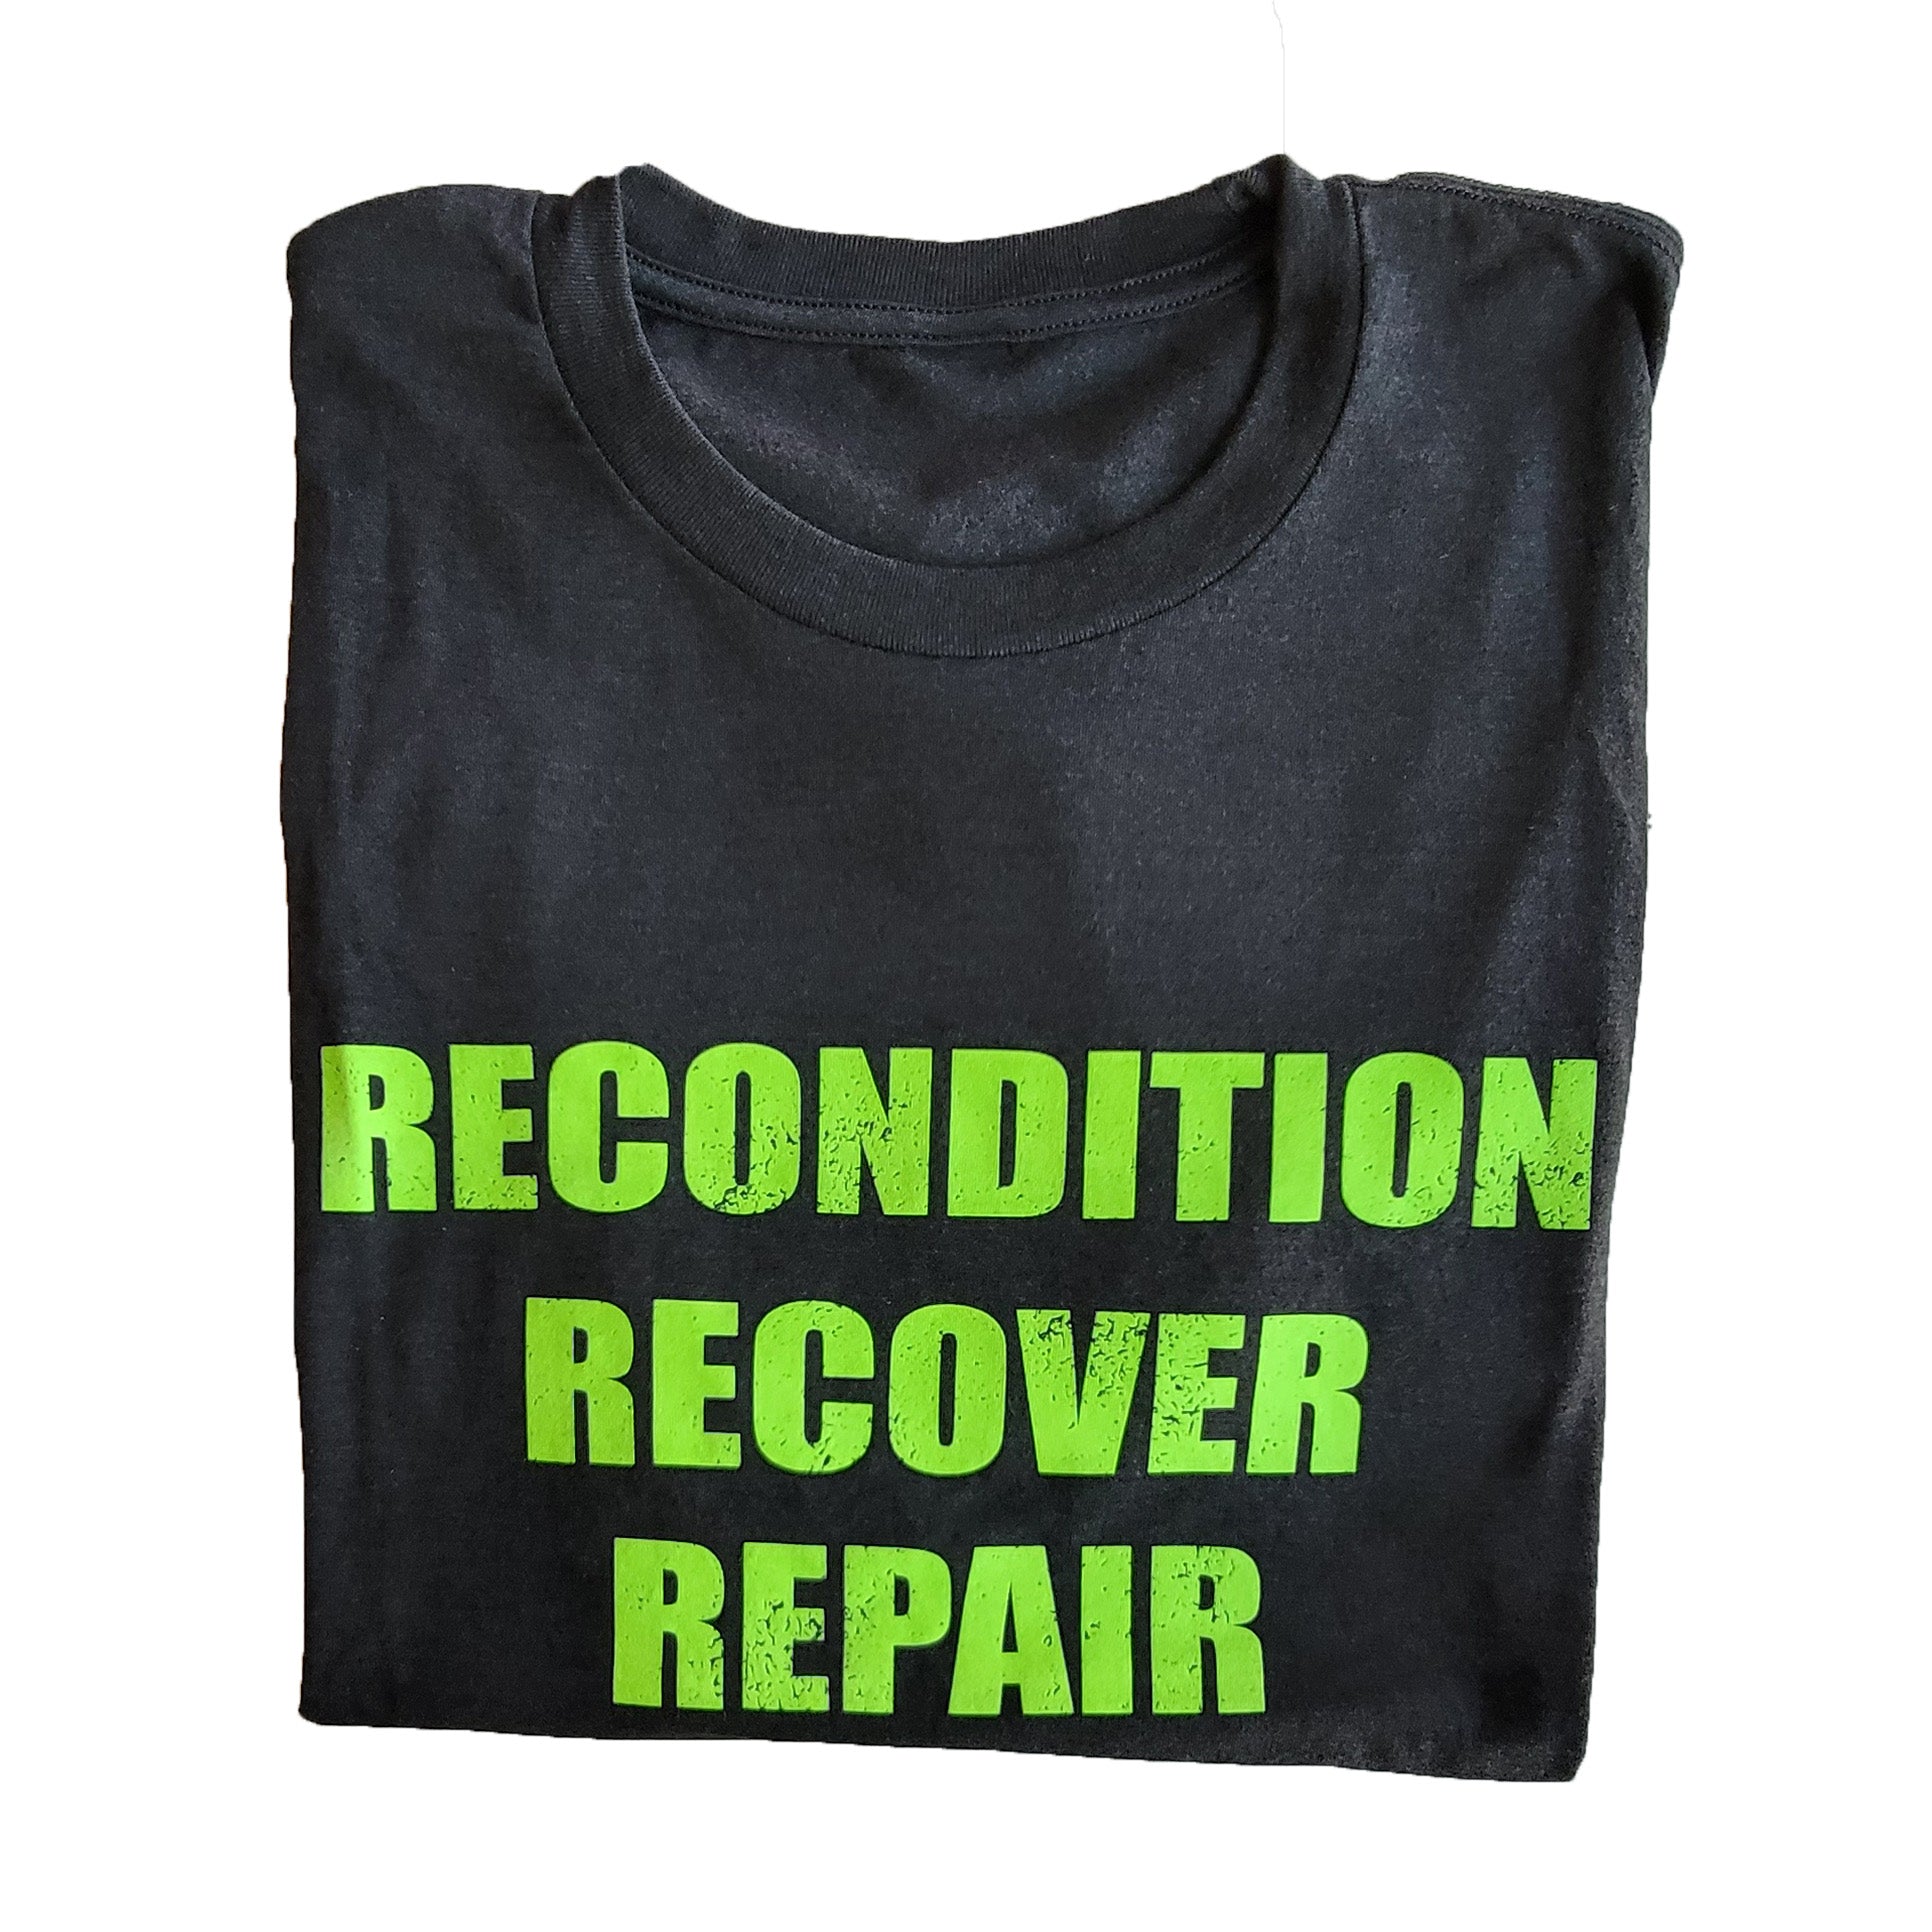 RECOGNITION RECOVERY REPAIR UNISEX T-SHIRT PRO BLEND